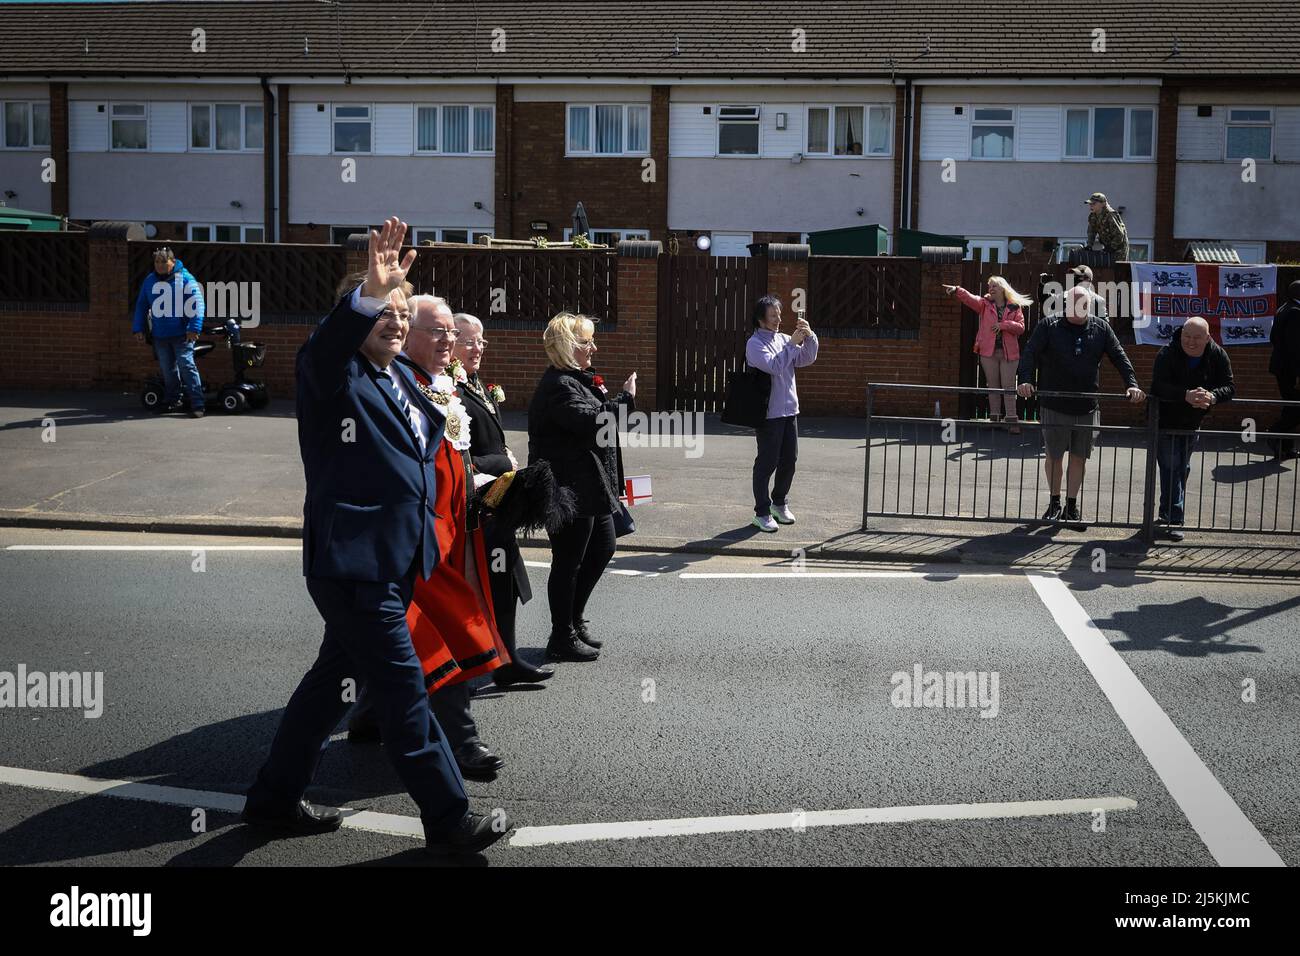 Manchester, UK. 24th Apr, 2022. Councillor Pat Karney leads the St Georges Day parade. Hundreds of people join in the annual celebration which marks the death of the patron Saint Of England.ÊAndy Barton/Alamy Live News Credit: Andy Barton/Alamy Live News Stock Photo